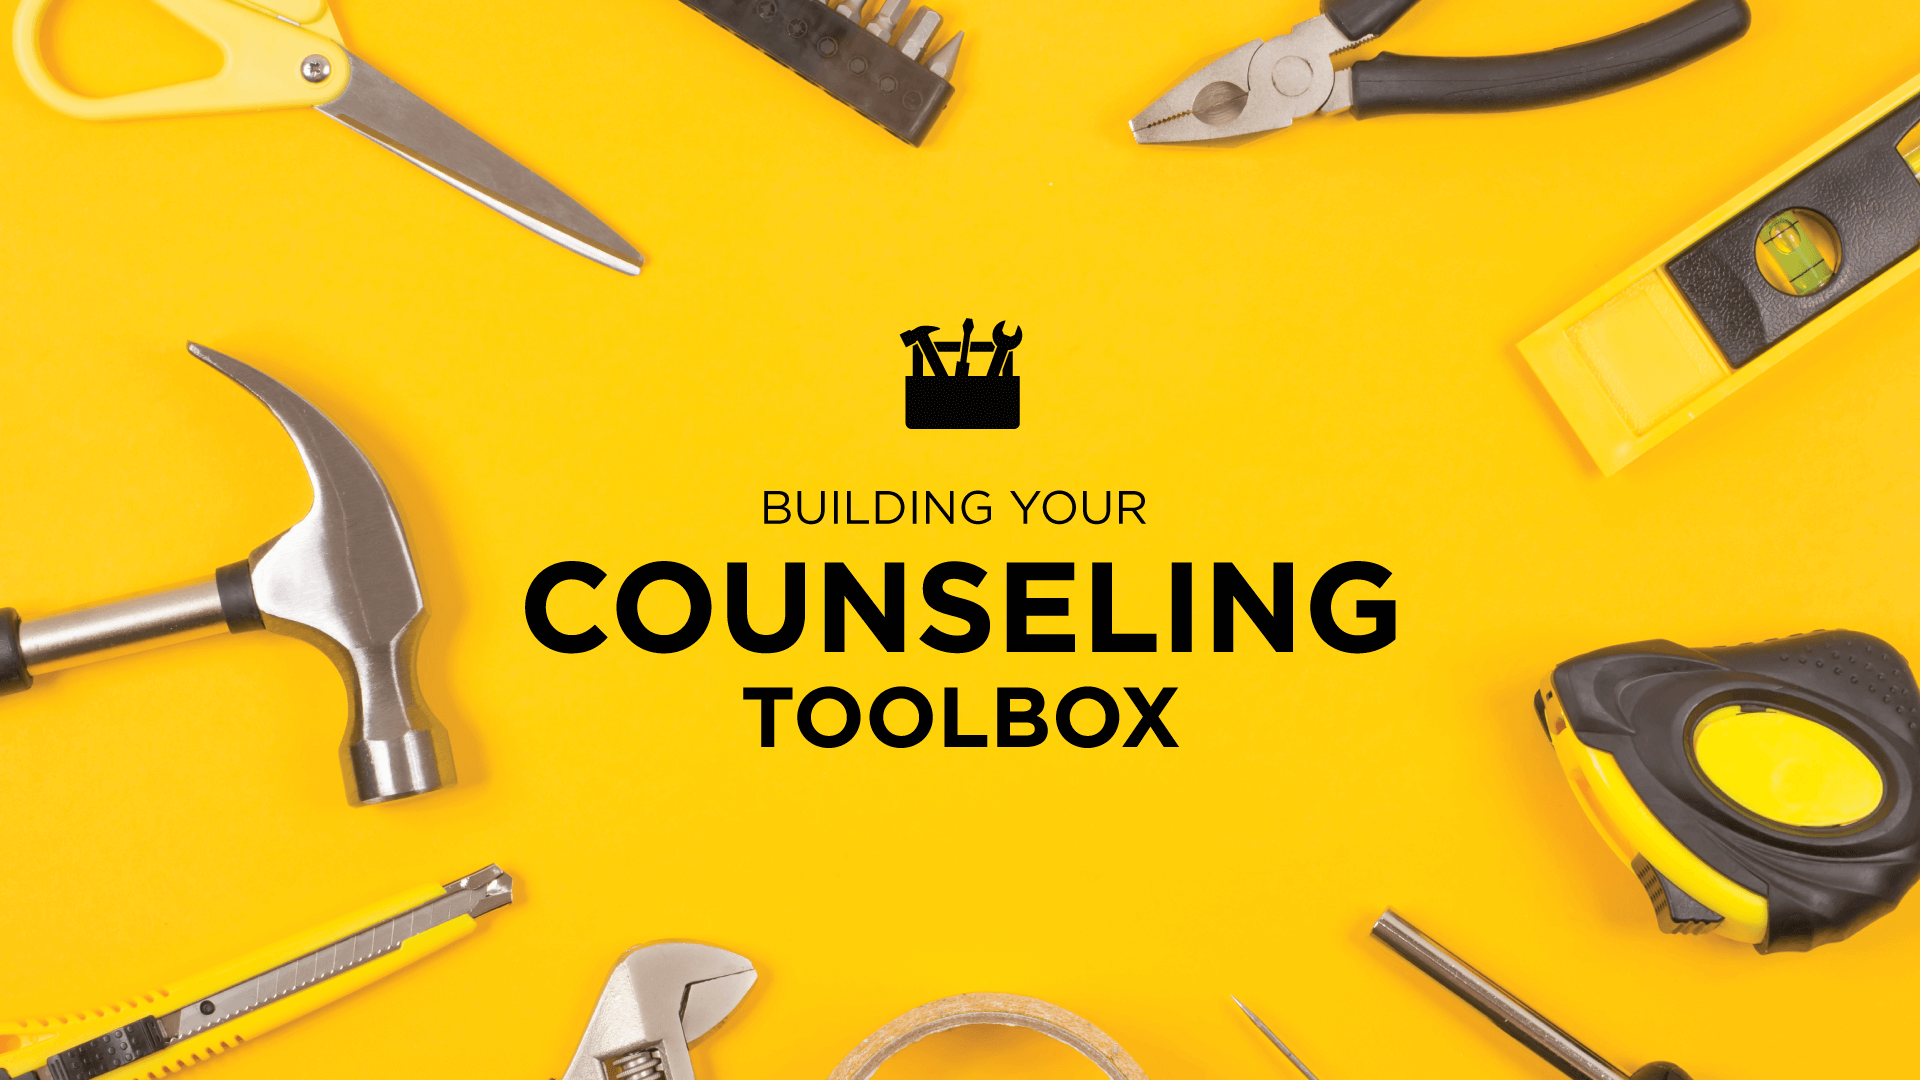 Building Your Counseling Toolbox banner